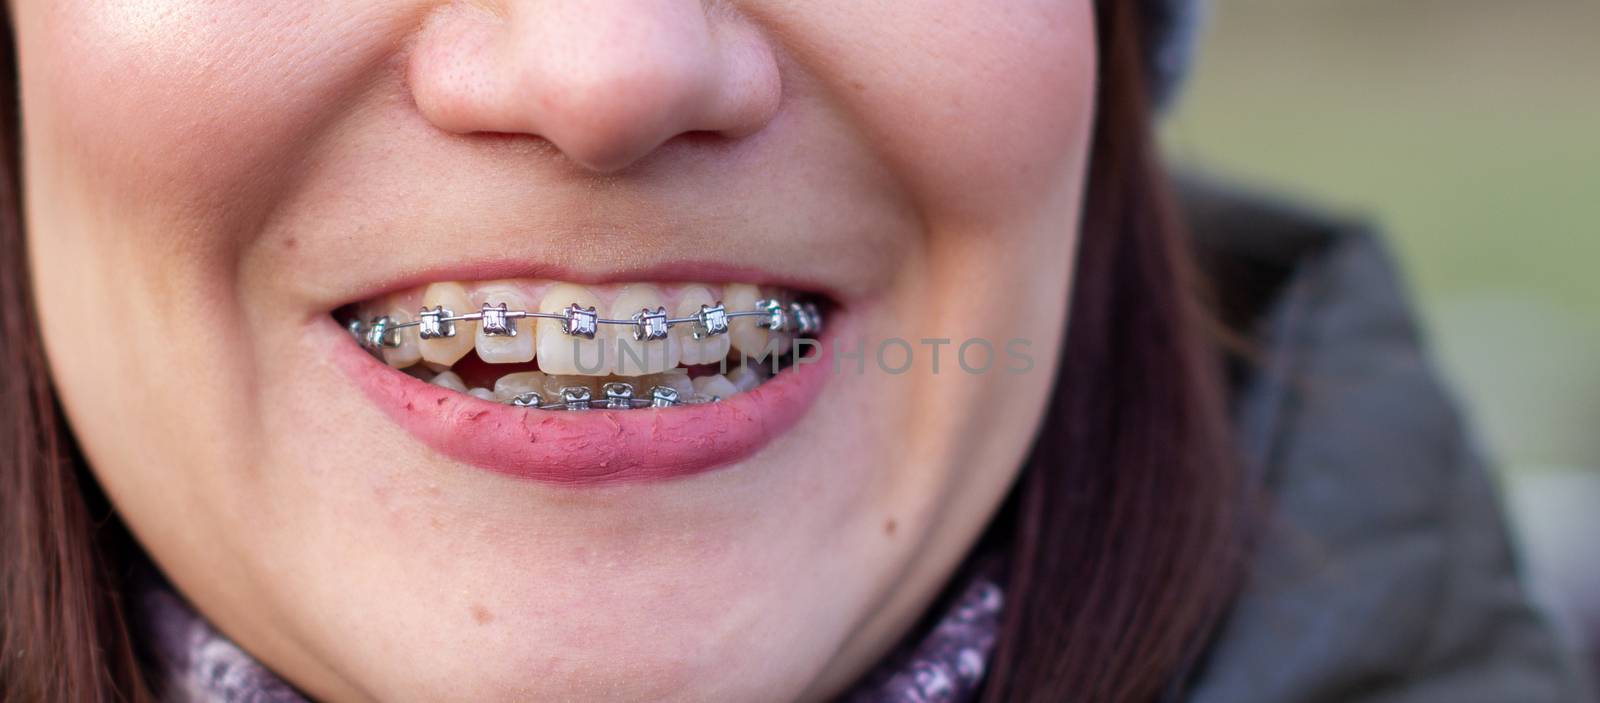 Brasket system in a girl's smiling mouth, macro photography of teeth. large face and painted lips. Braces on the girl's teeth